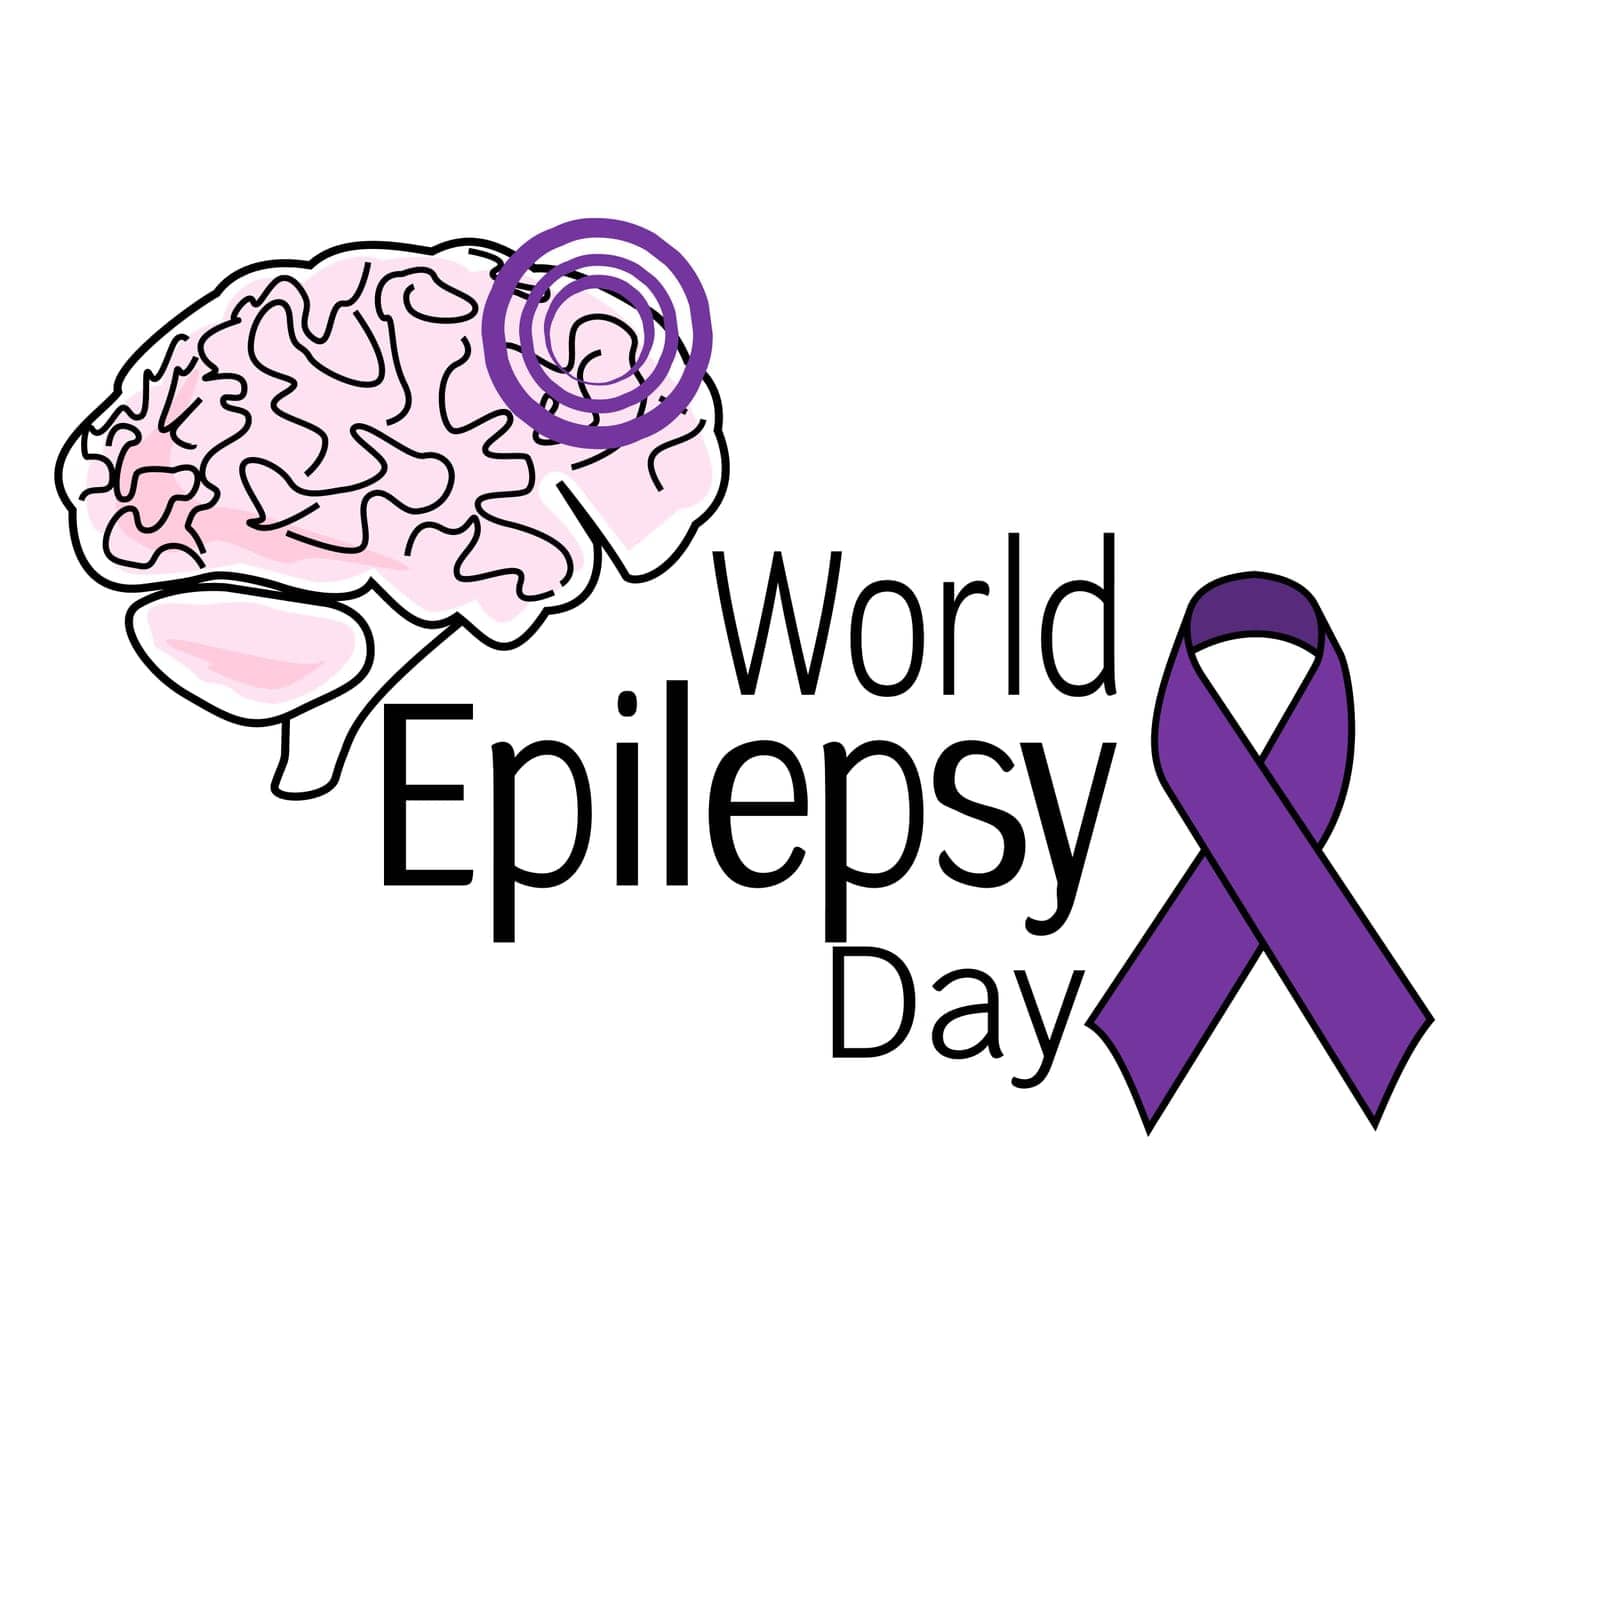 World Epilepsy Day, symbolic image of the brain, ribbons and themed inscription by Sunny_Coloring